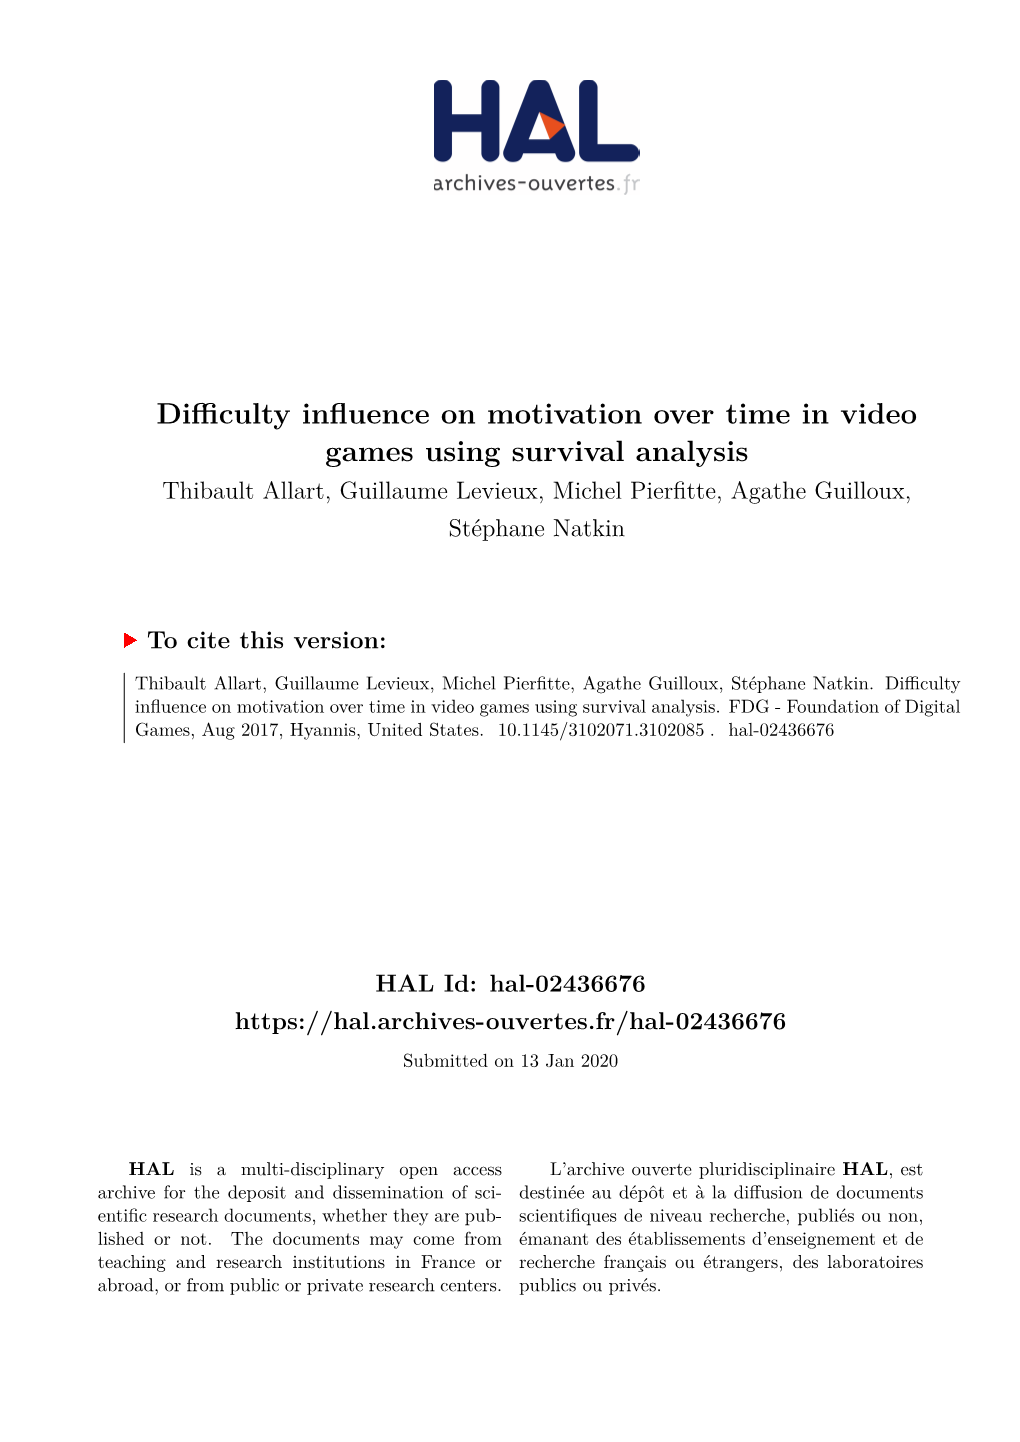 Difficulty Influence on Motivation Over Time in Video Games Using Survival